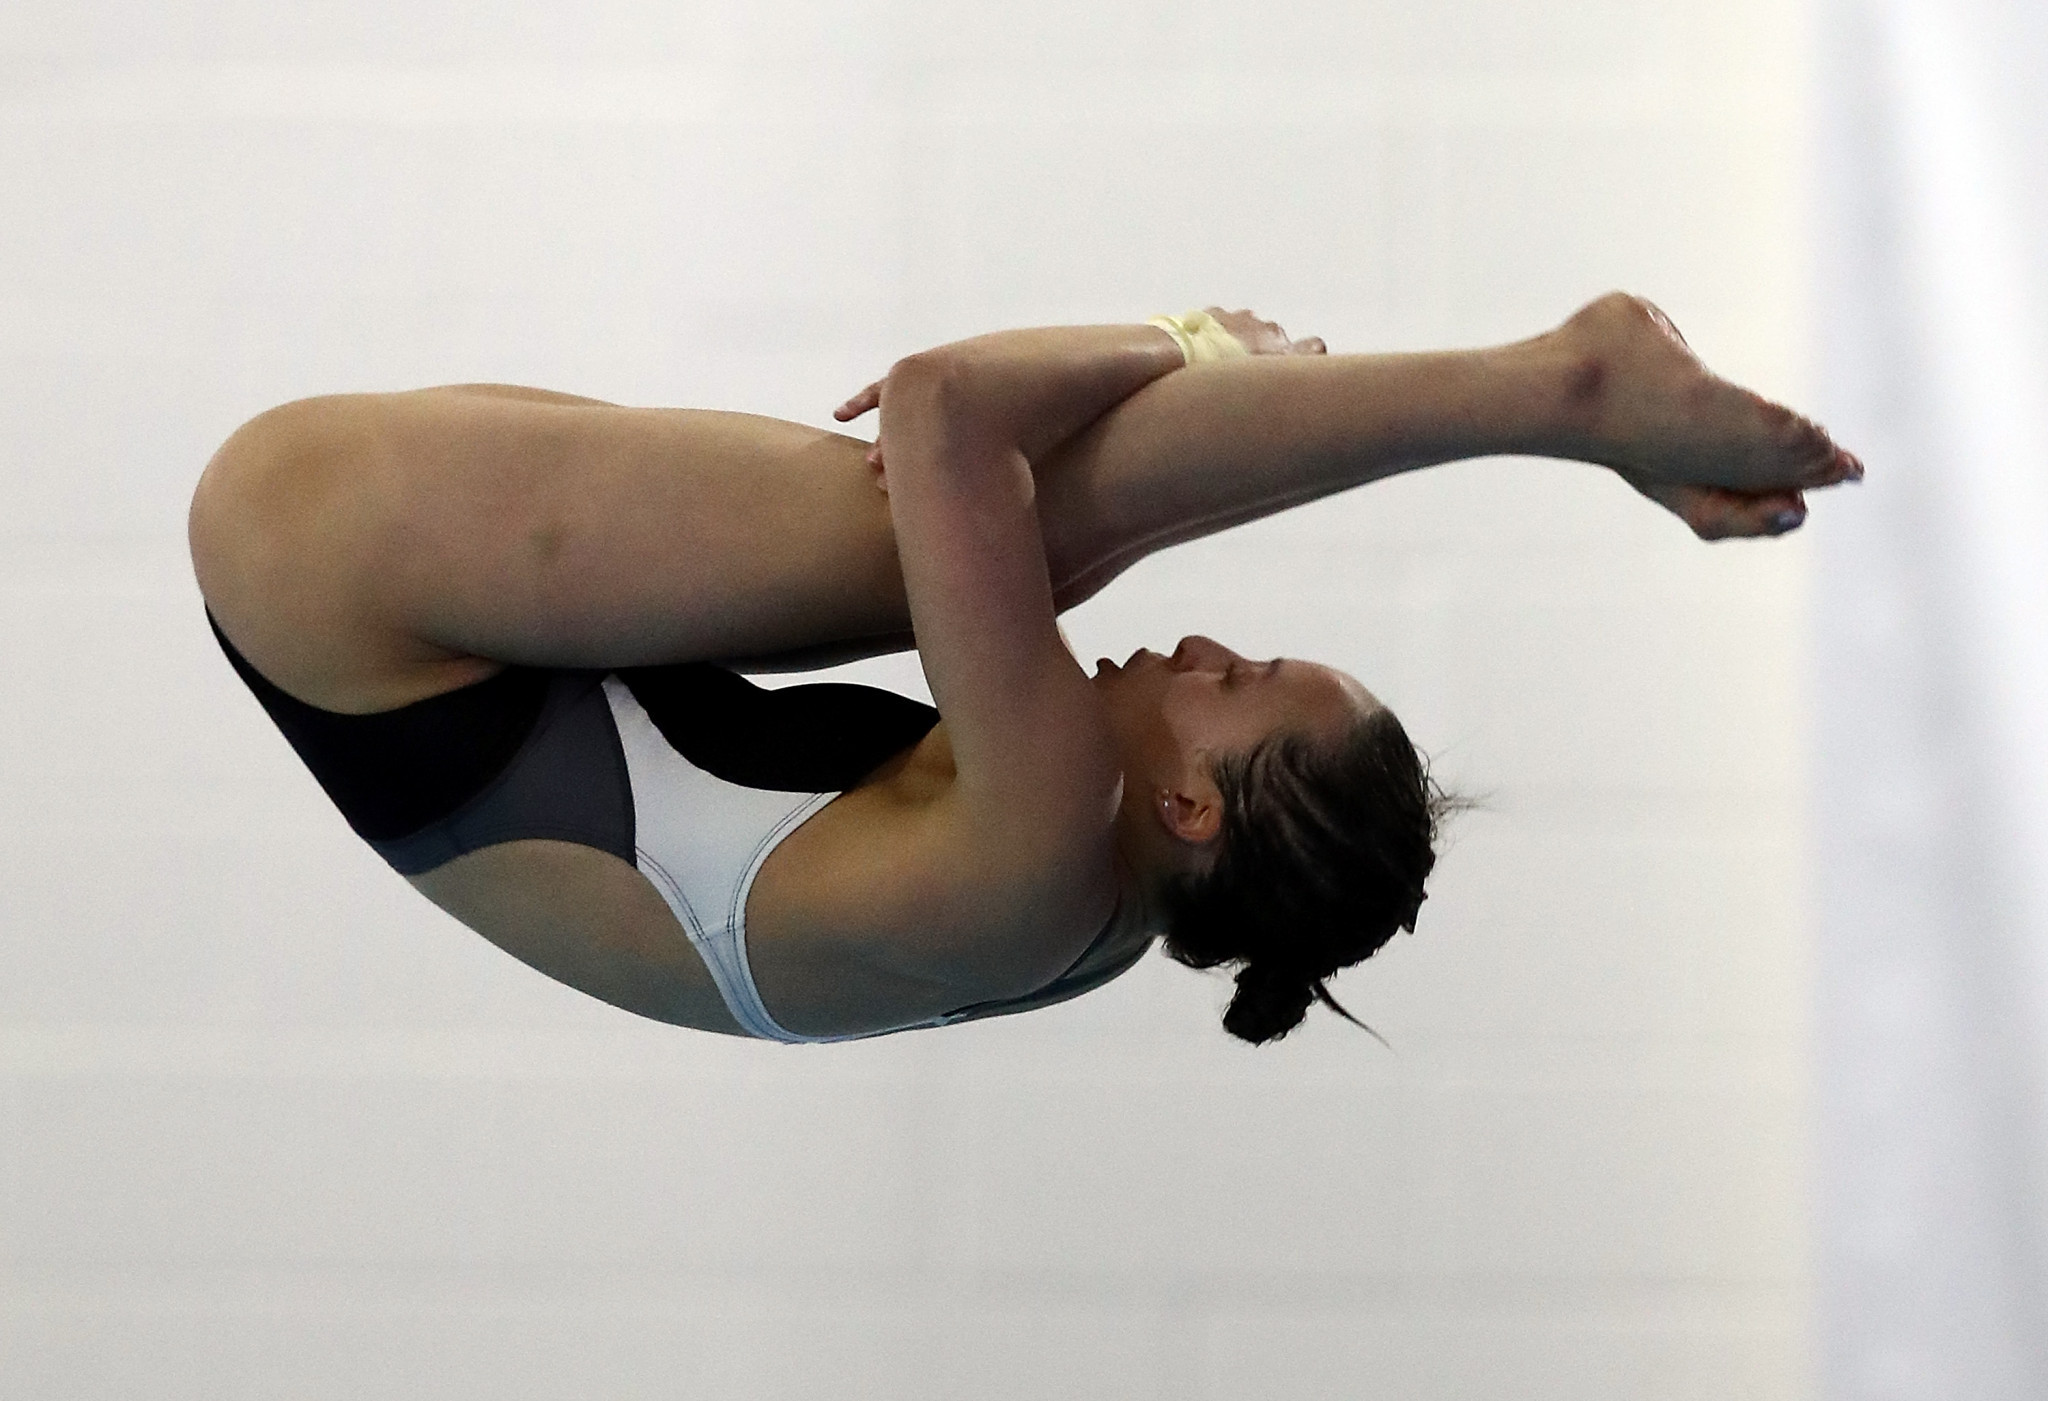  Mission Viejo welcomes first FINA Diving Grand Prix in US for six years